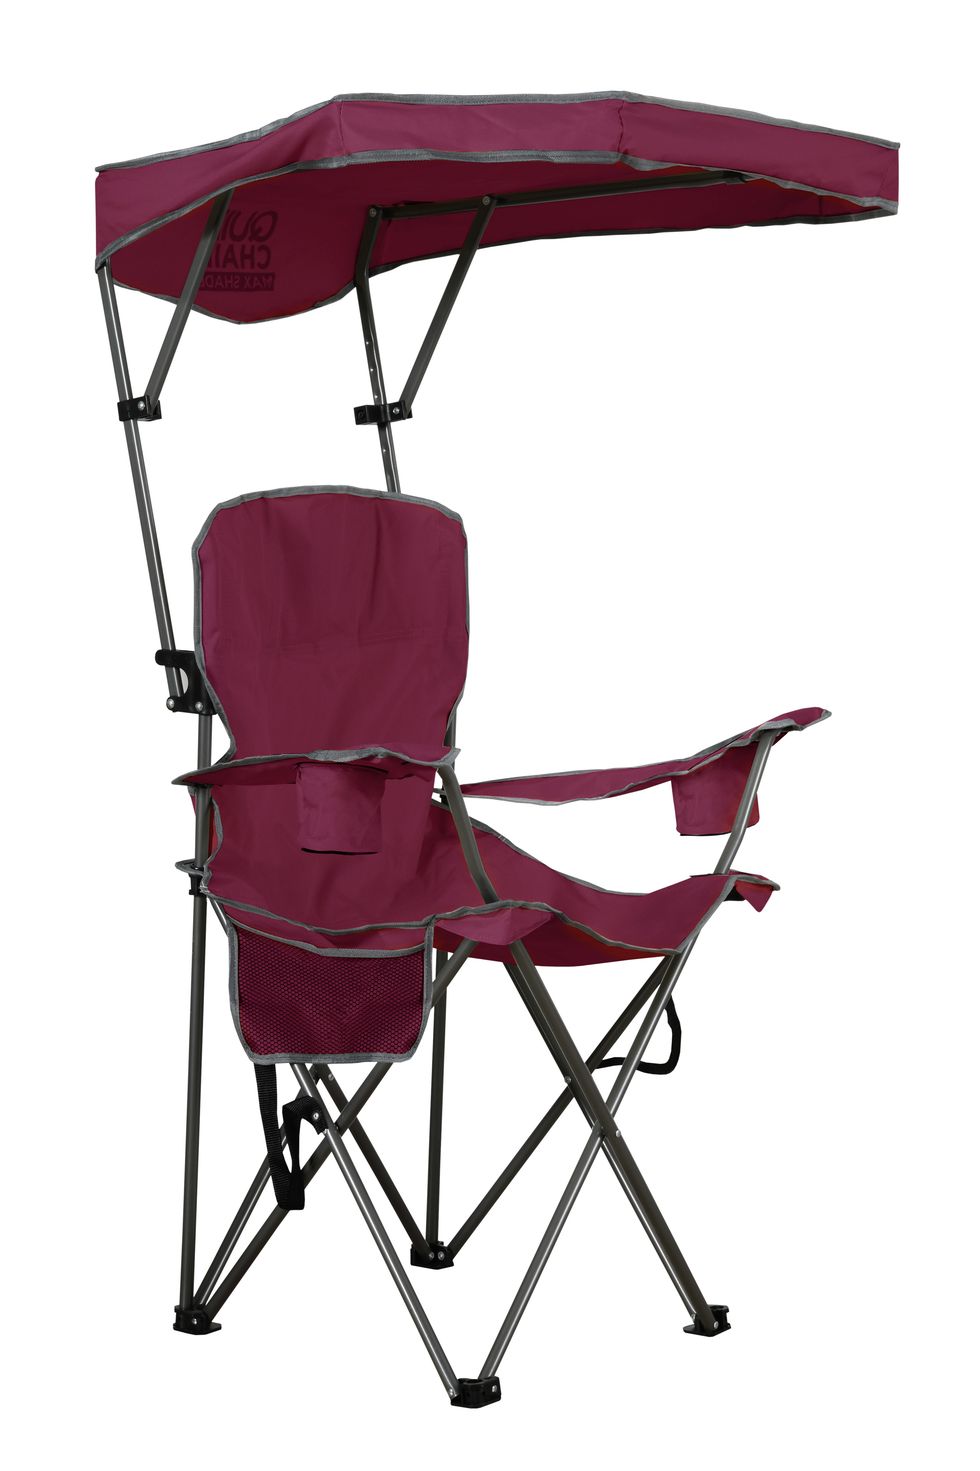 12 Camping Chairs for Your Next ~Outdoorsy~ Adventure